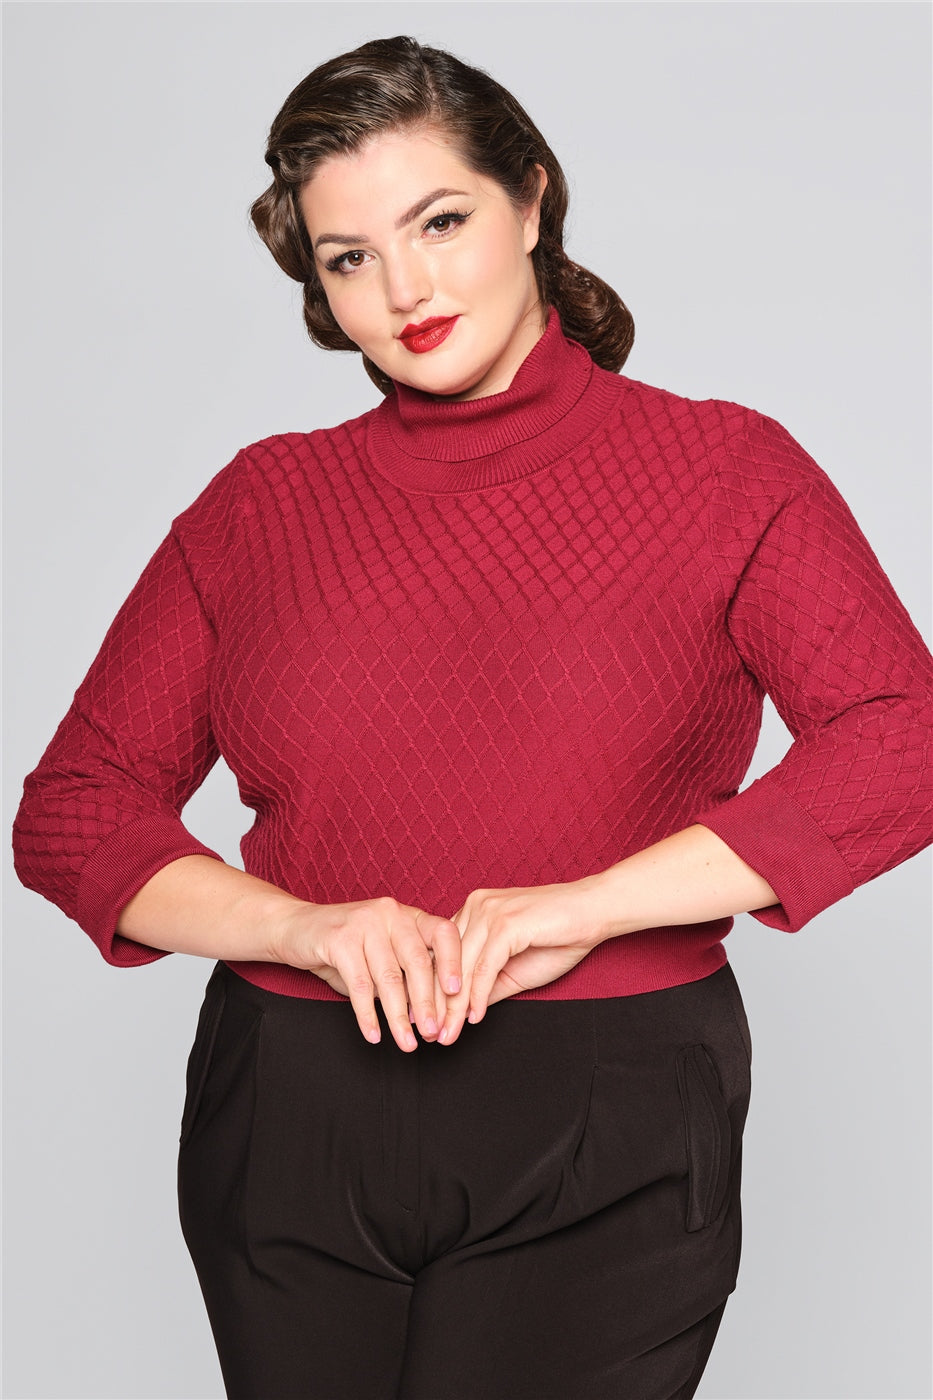 Brunette curvy model with red lipstick holding her hands in front of her, wearing a burgundy turtleneck knitted jumper and high waisted black trousers